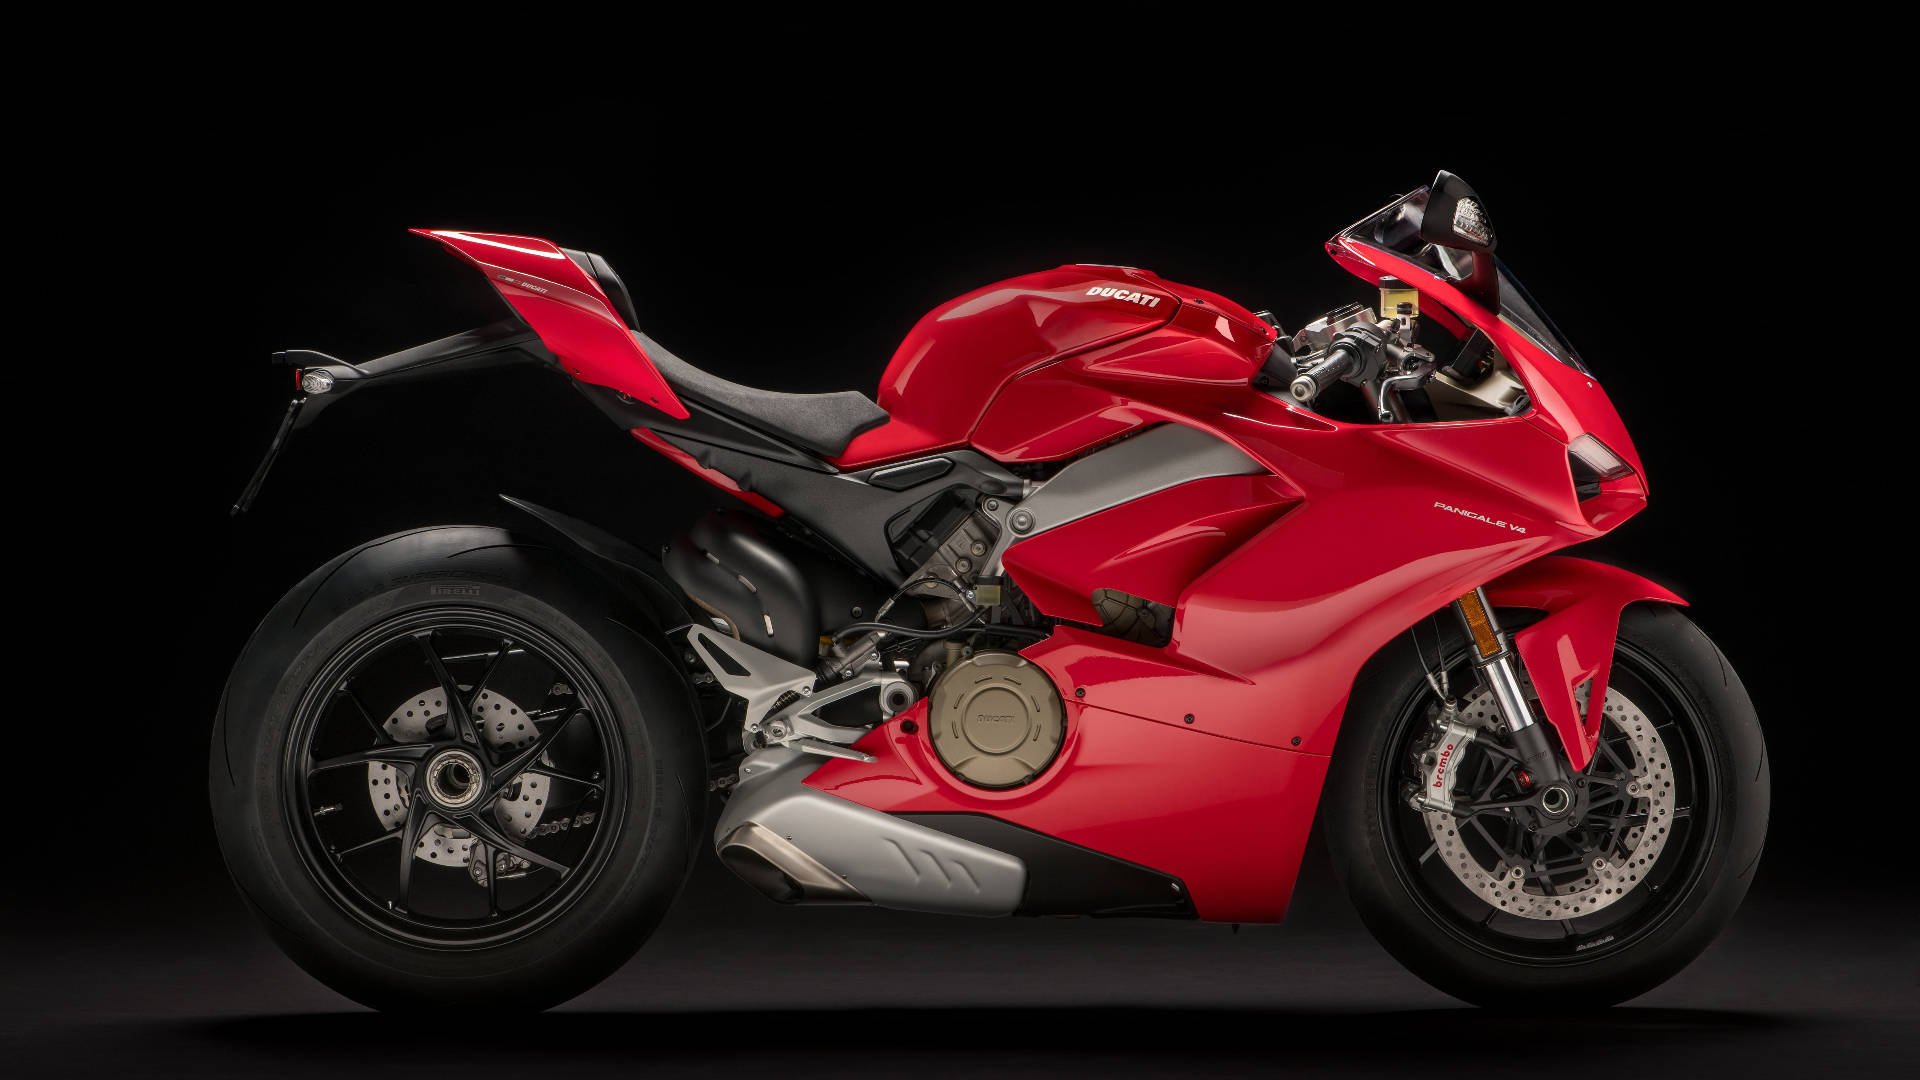 Image  Ducati Panigale V4 R - Magnificent Detail Wallpaper